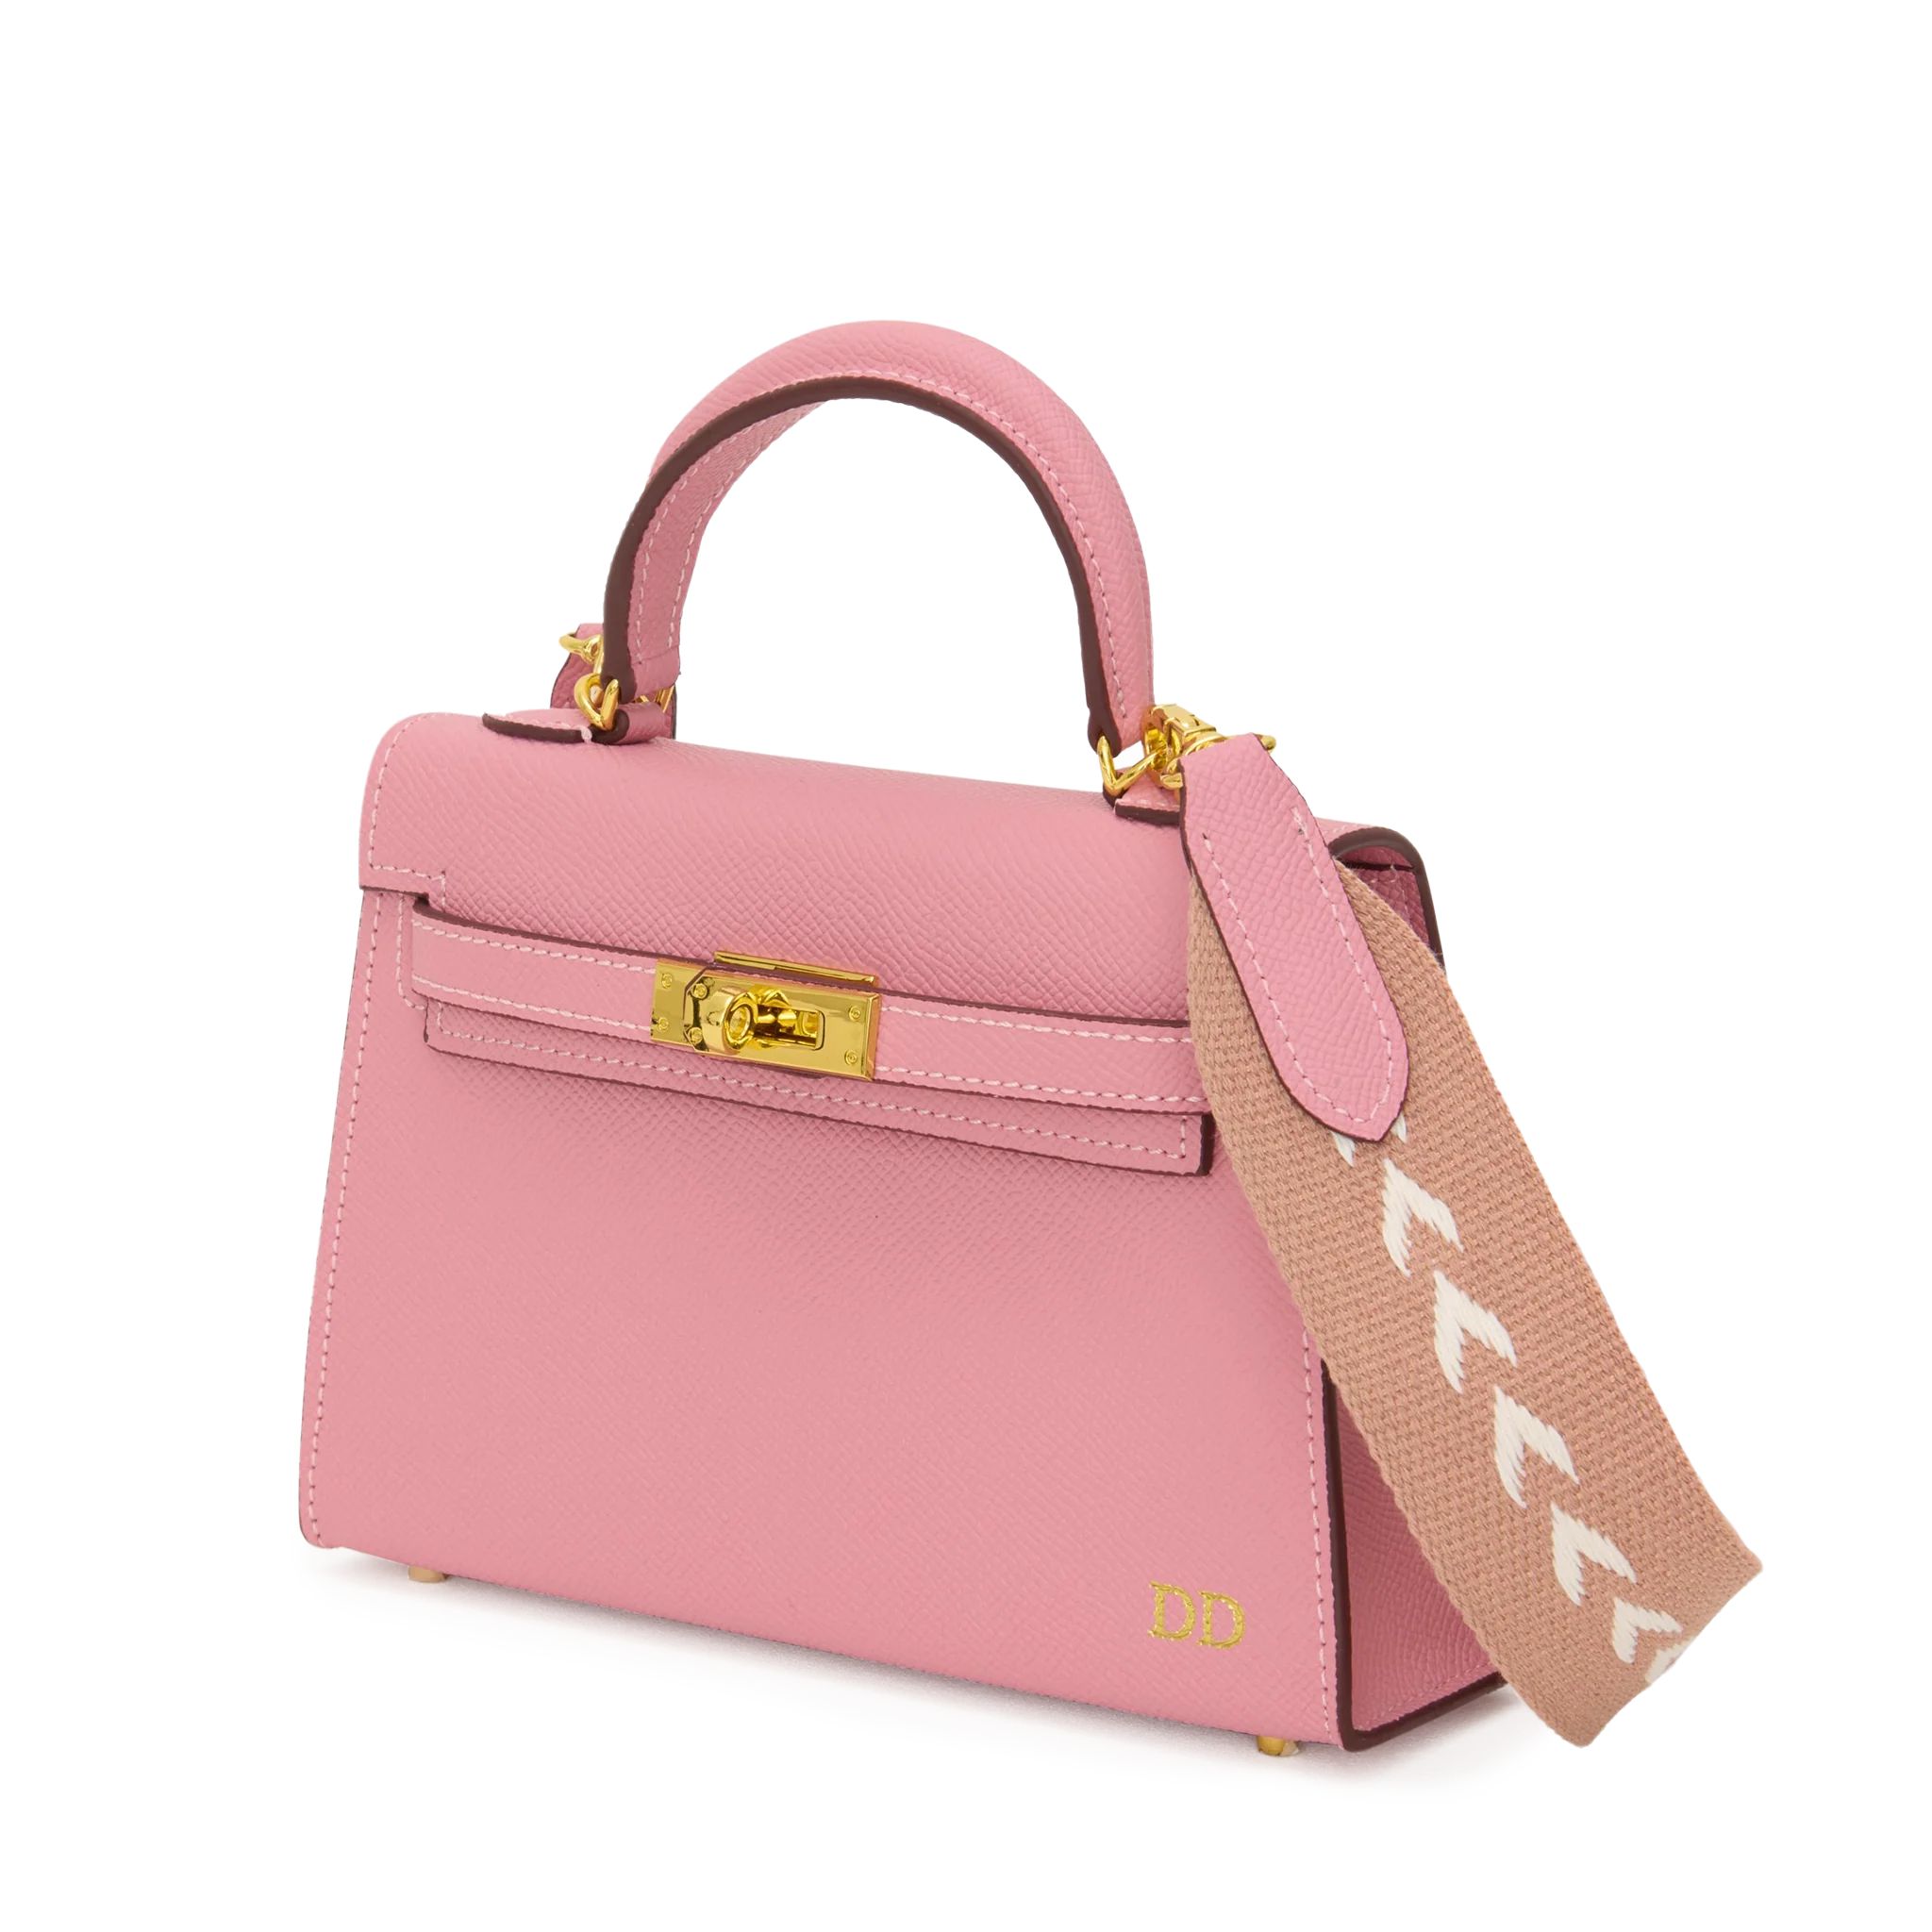 Lily & Bean Hettie Mini Bag - Blush Pink with Initials and Patterned F | Lily and Bean